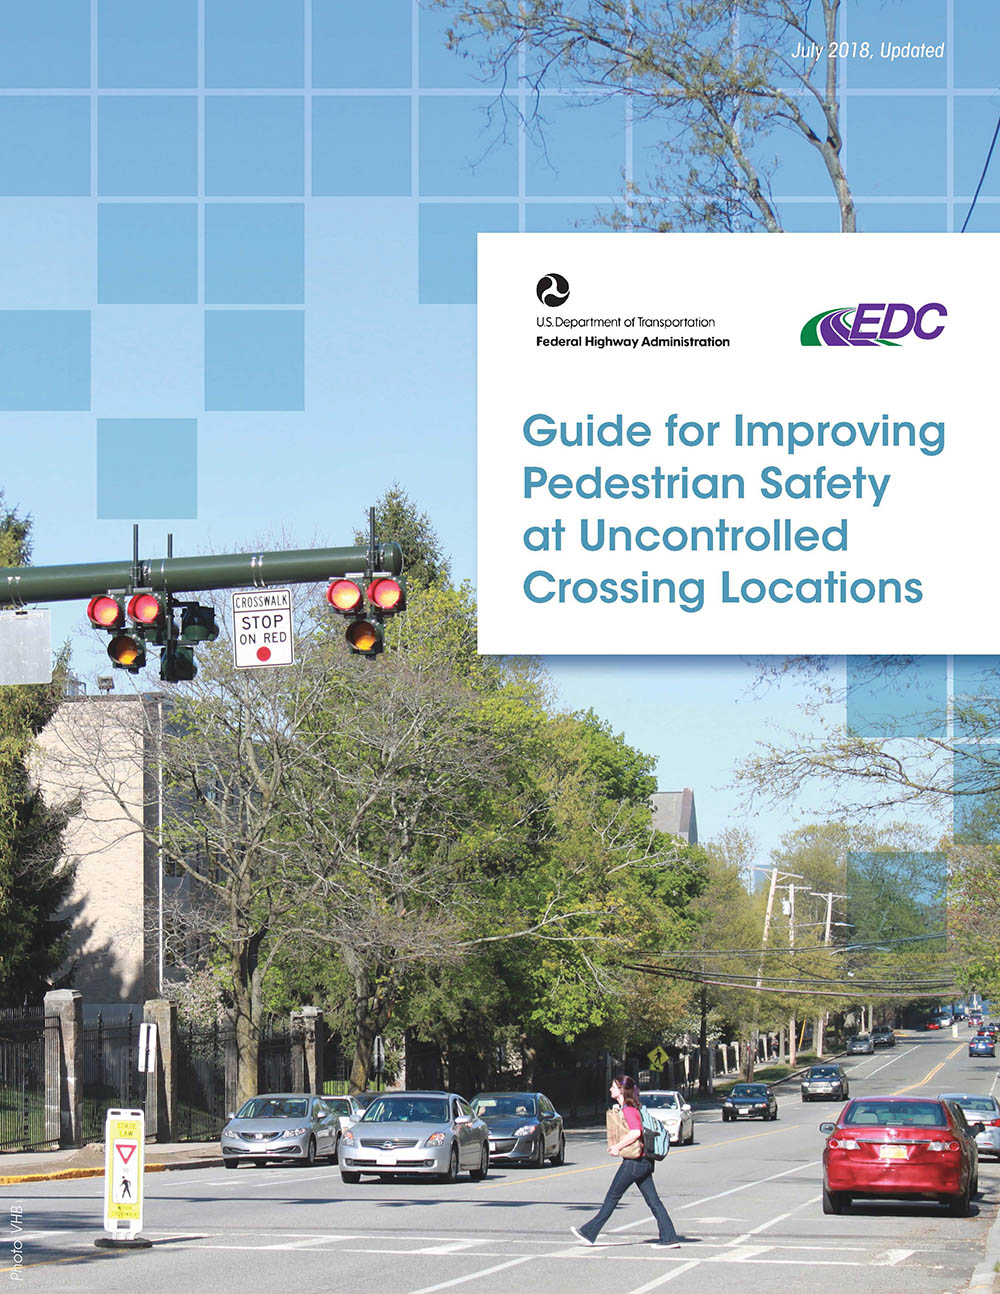 Cover of the FHWA Guide for Improving Pedestrian Safety at Uncontrolled Crossing Locations.